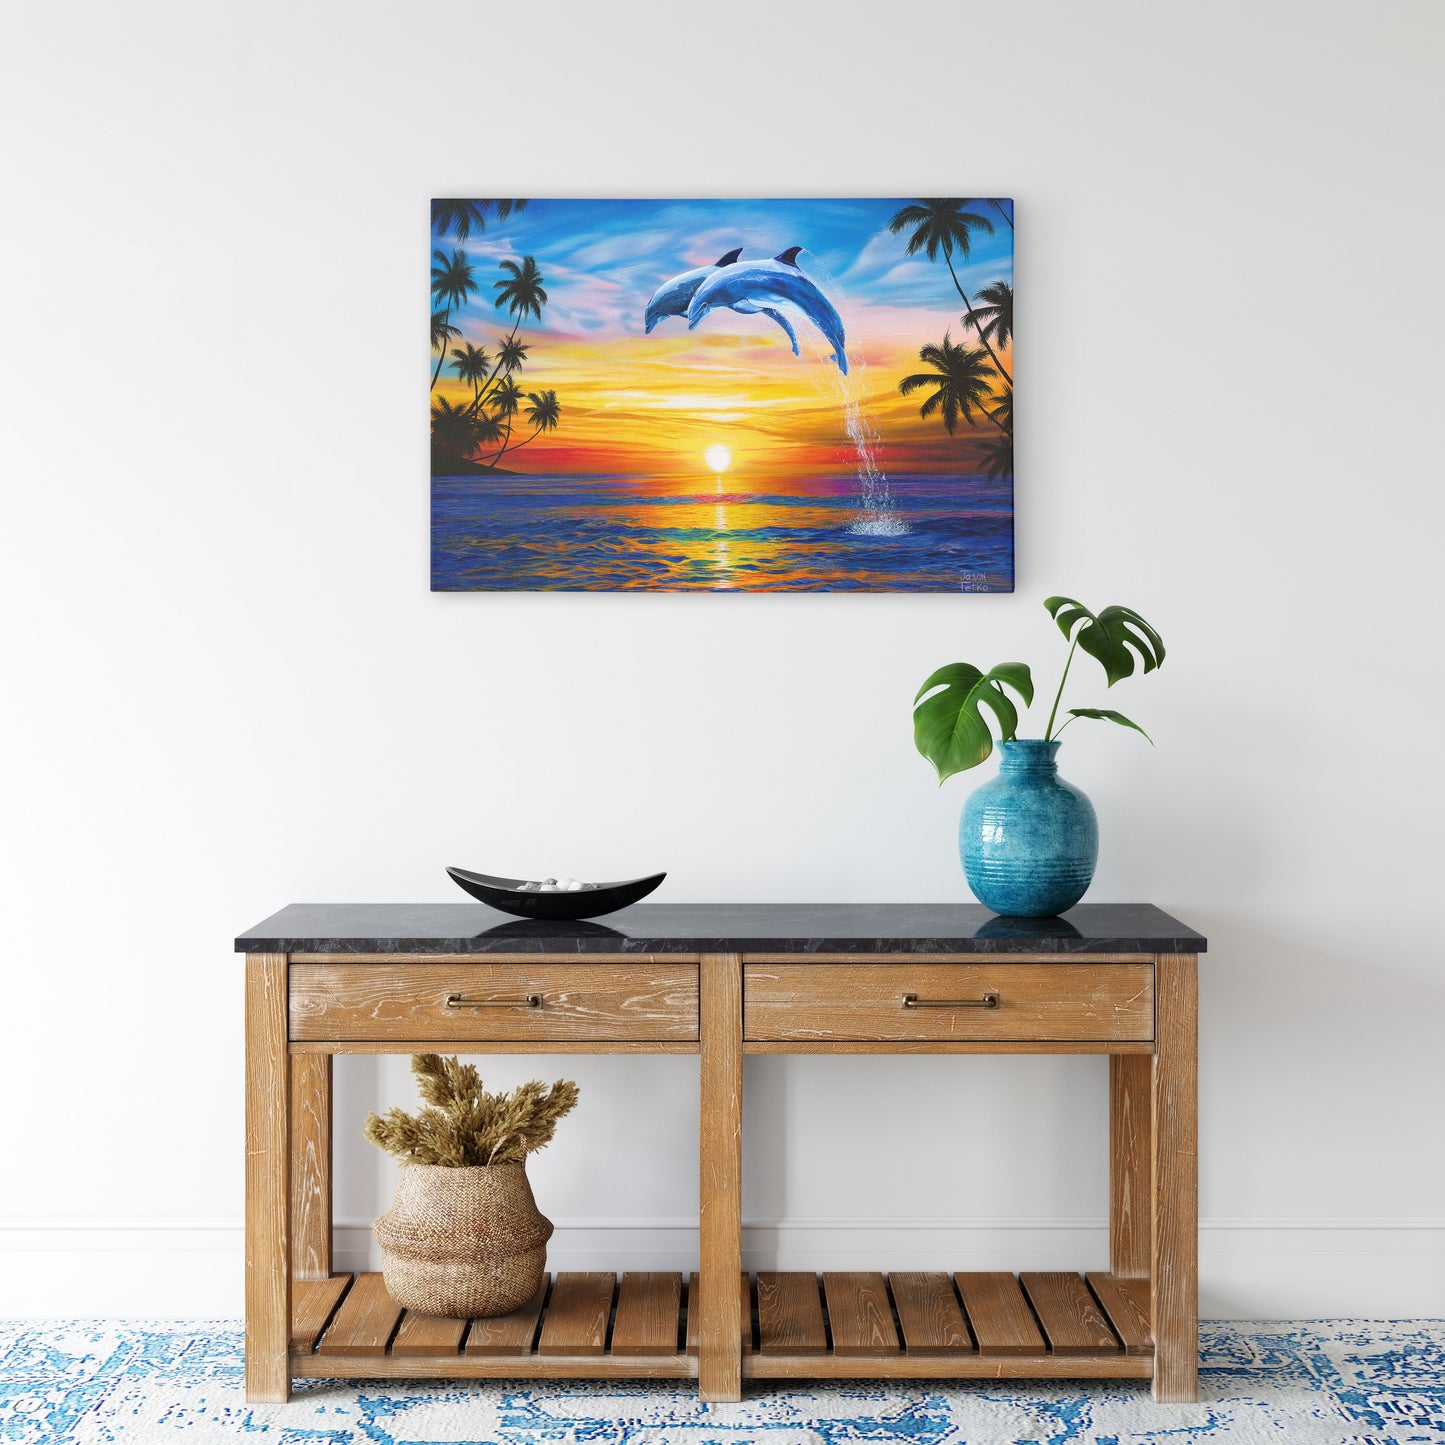 Dolphins Painting Wall Art Print - "Dolphin Sunset" by Jason Fetko